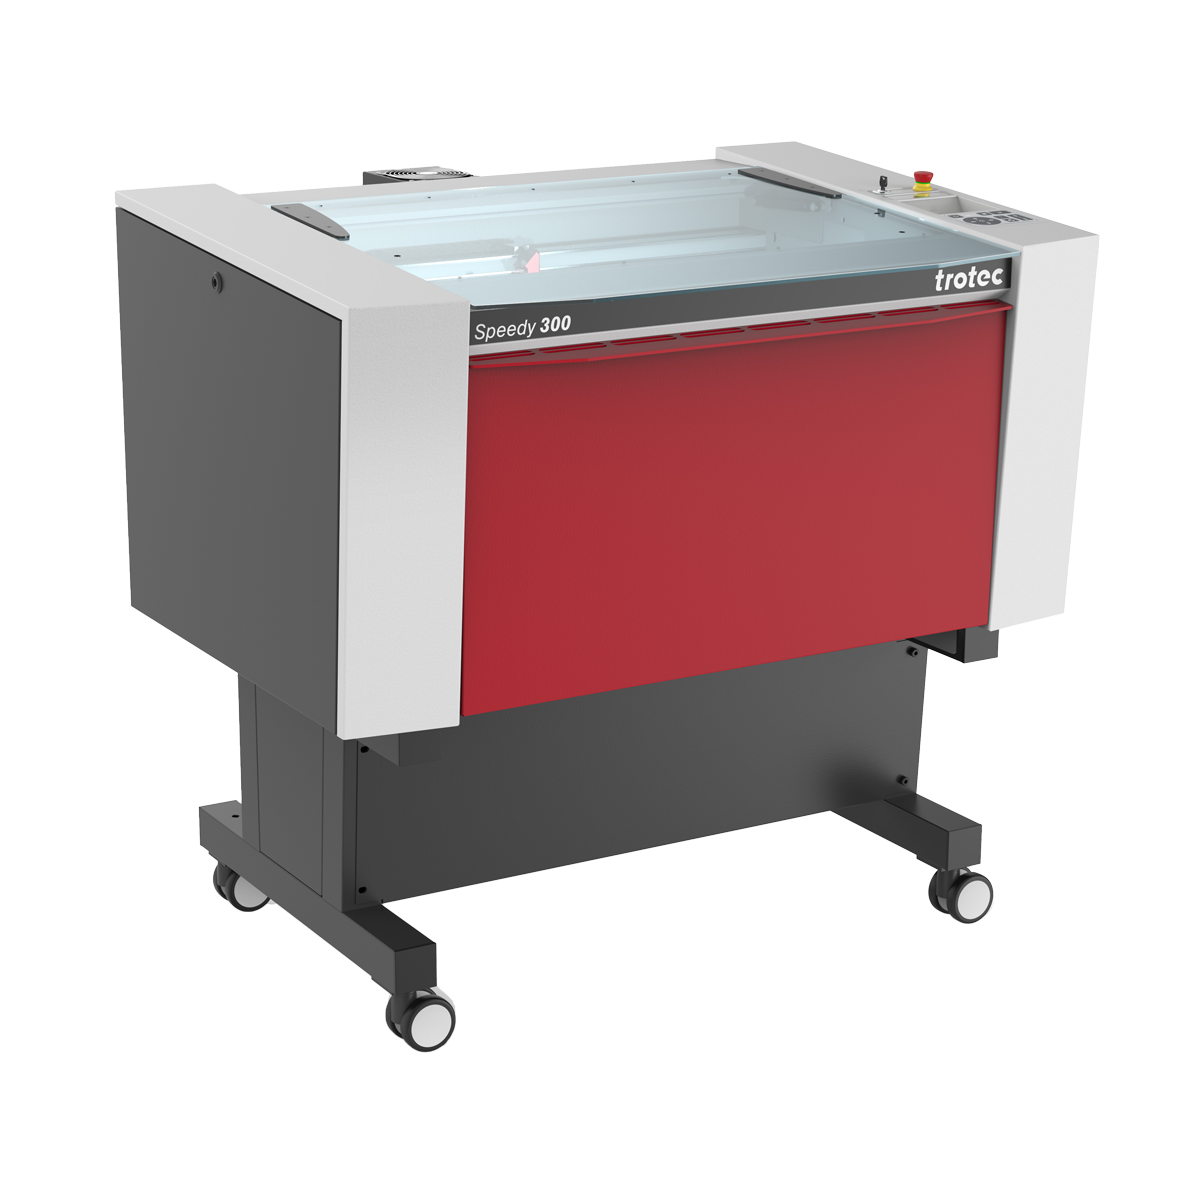 Image of Trotec Speedy 300 with transparent background